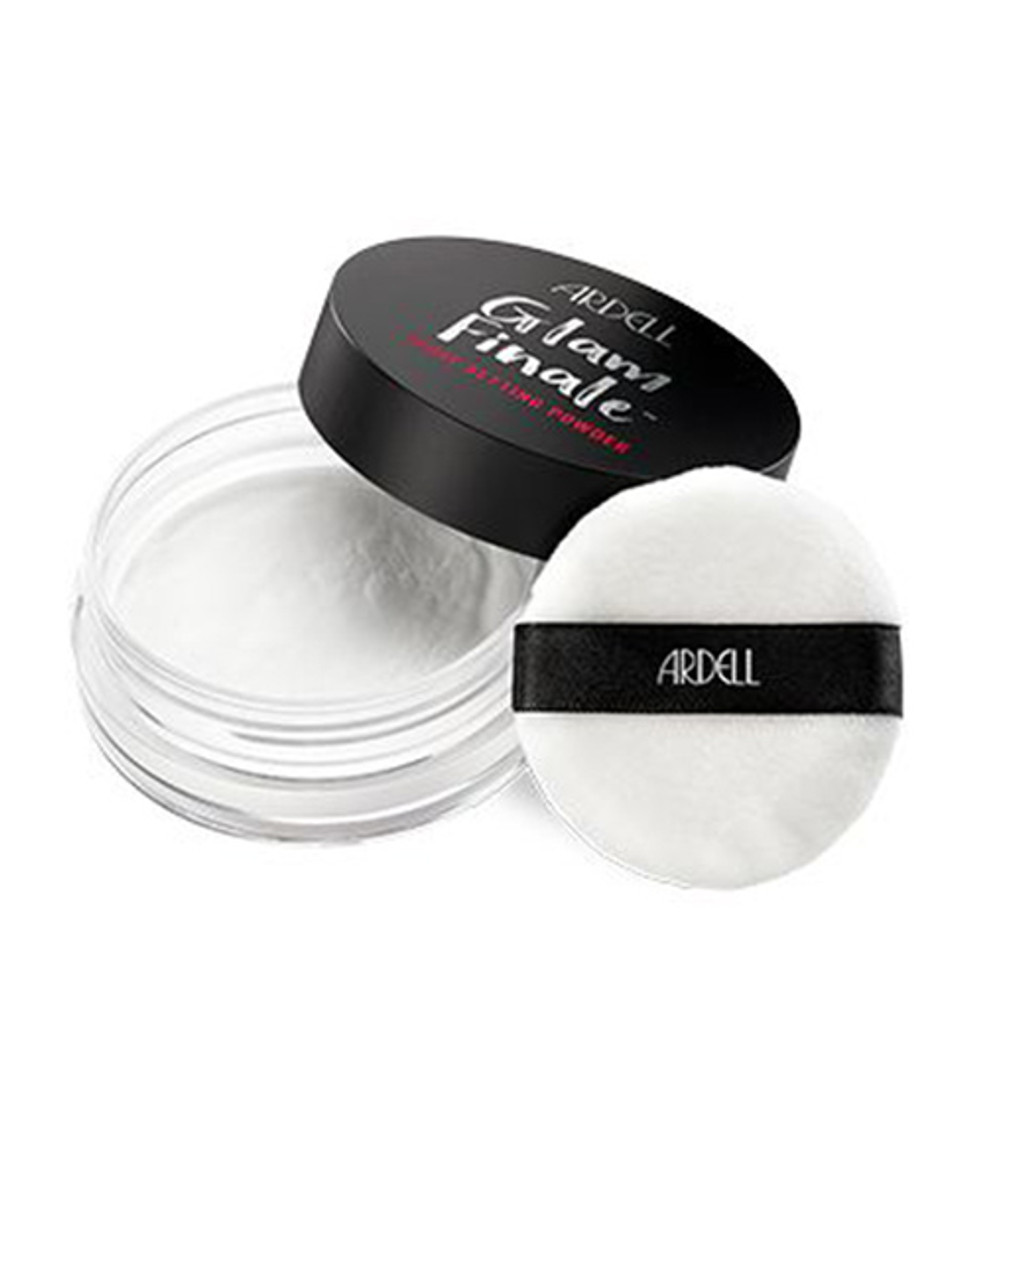 Ardell Beauty Glam Finale Loose Setting Powder Translucent - 0.21 oz / 6 g